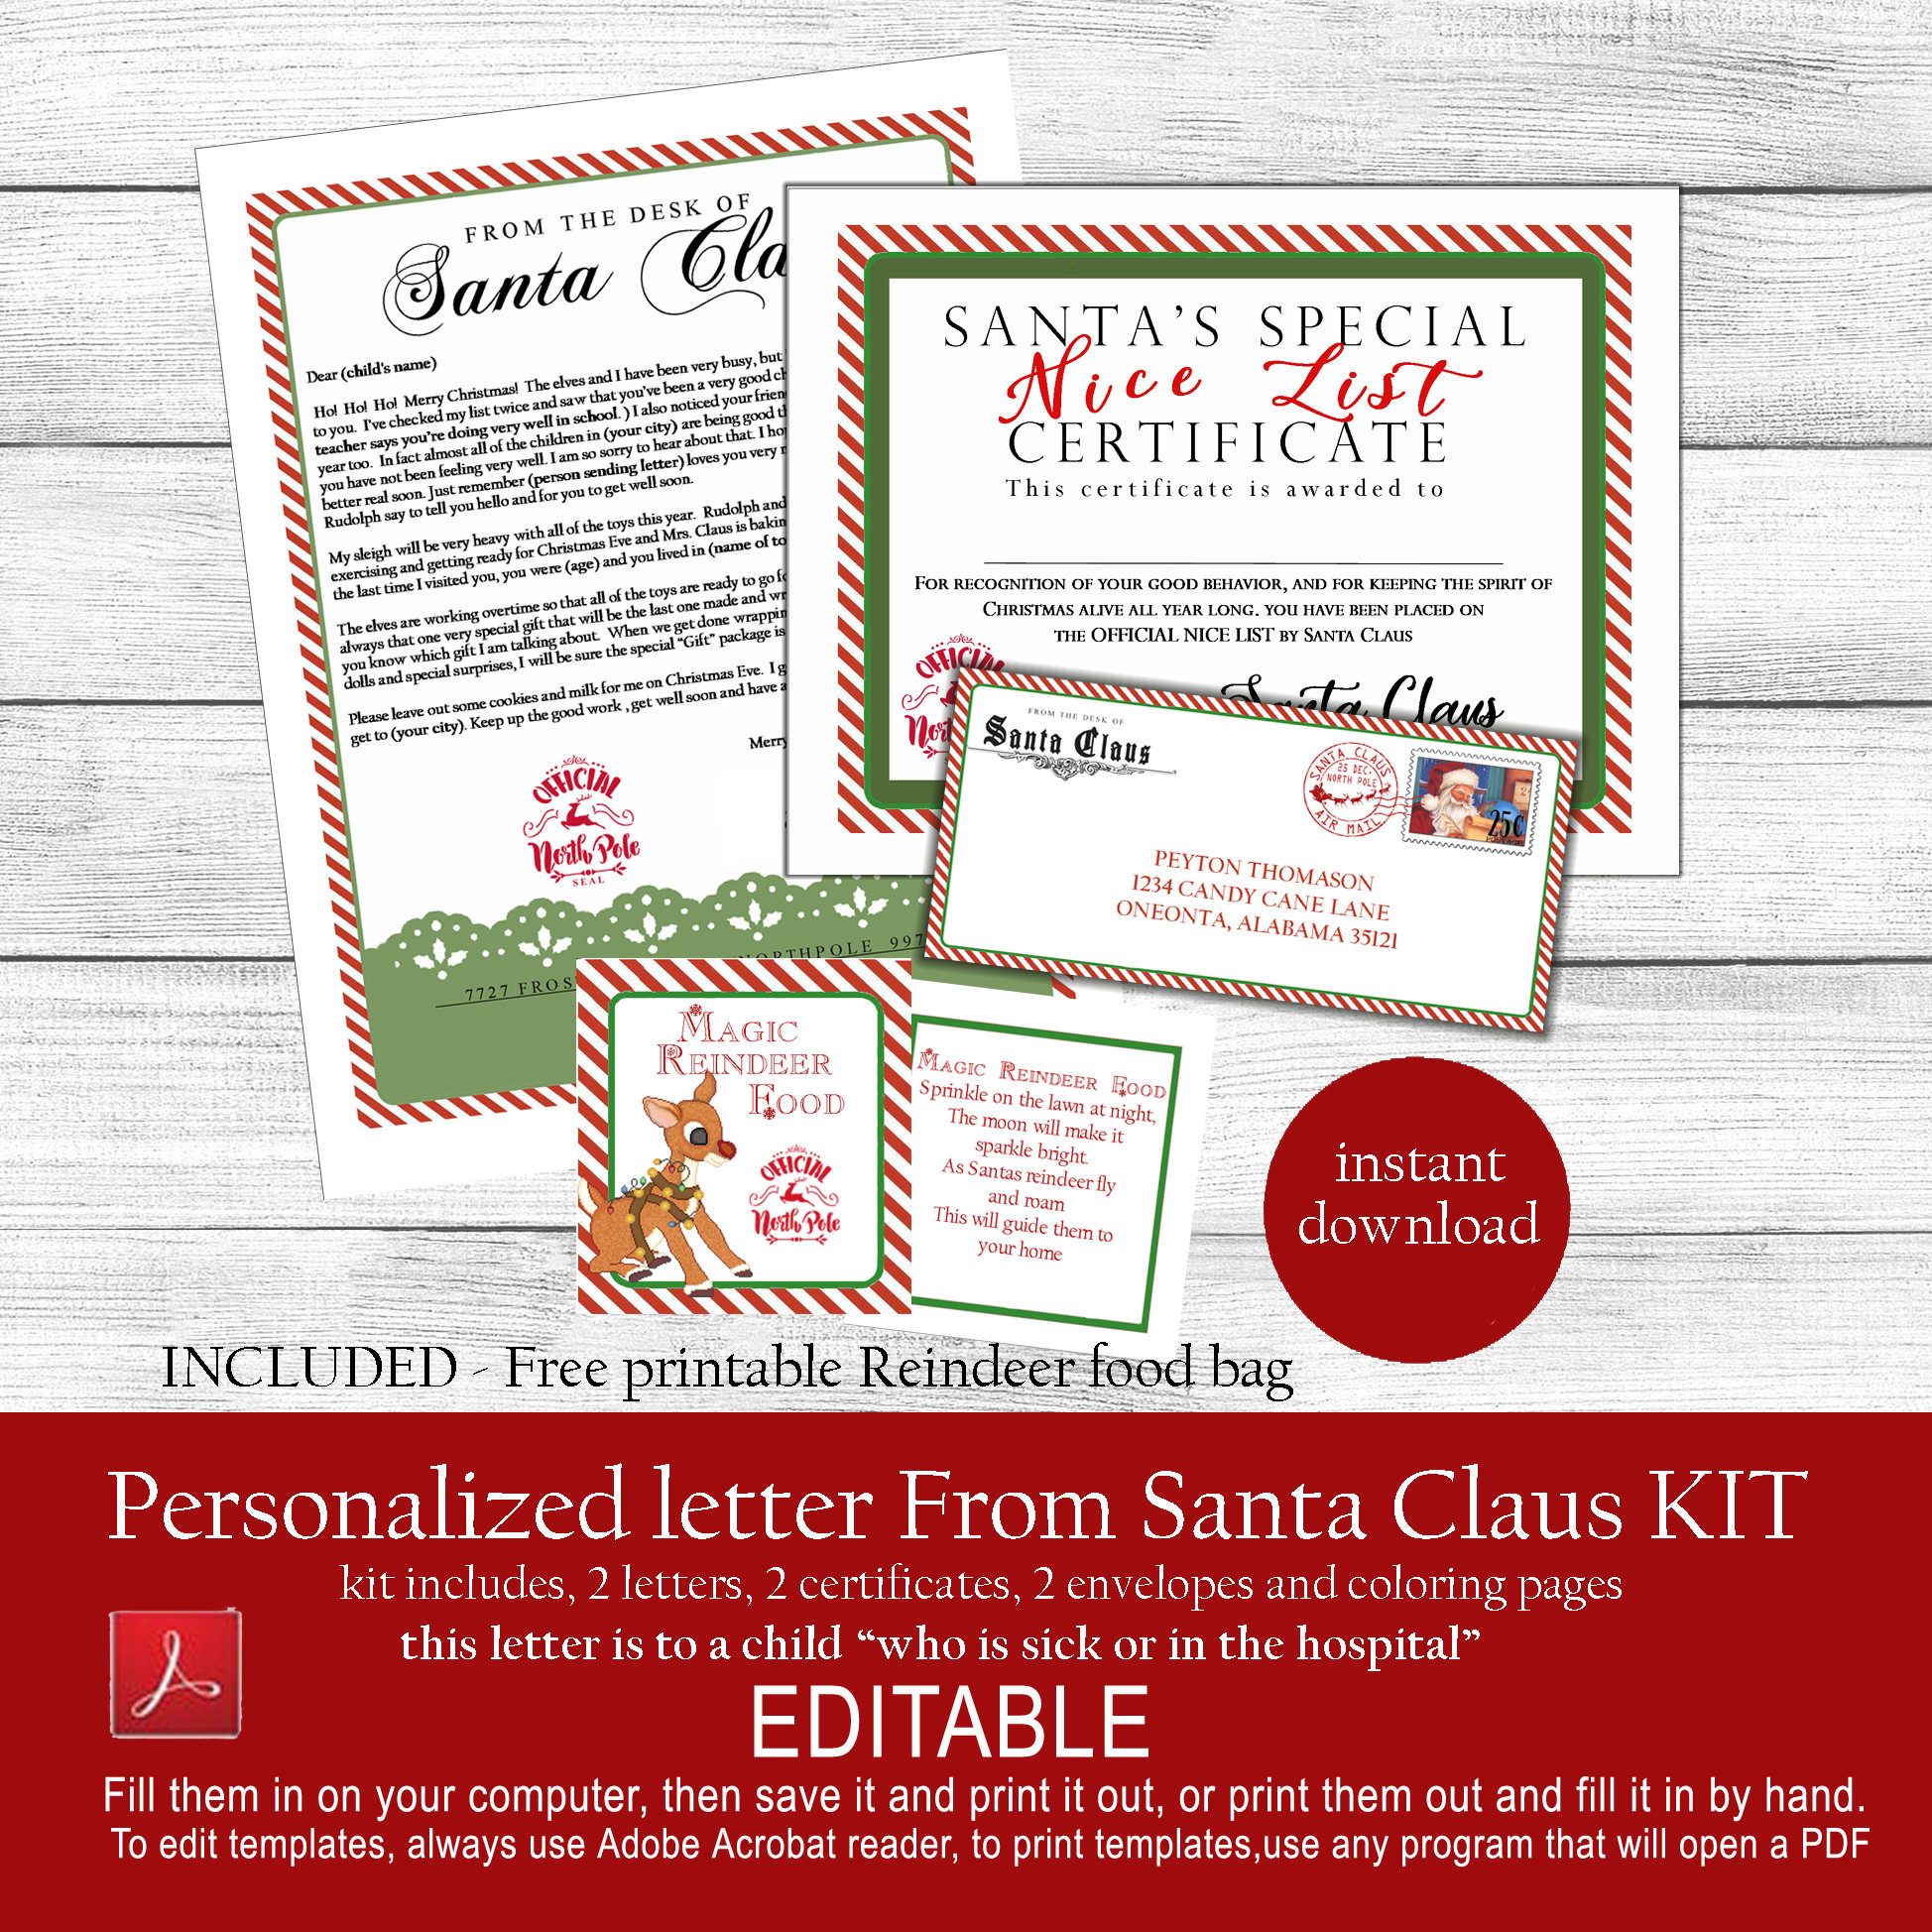 personalized-letter-from-santa-nice-list-certificate-christmas-santa